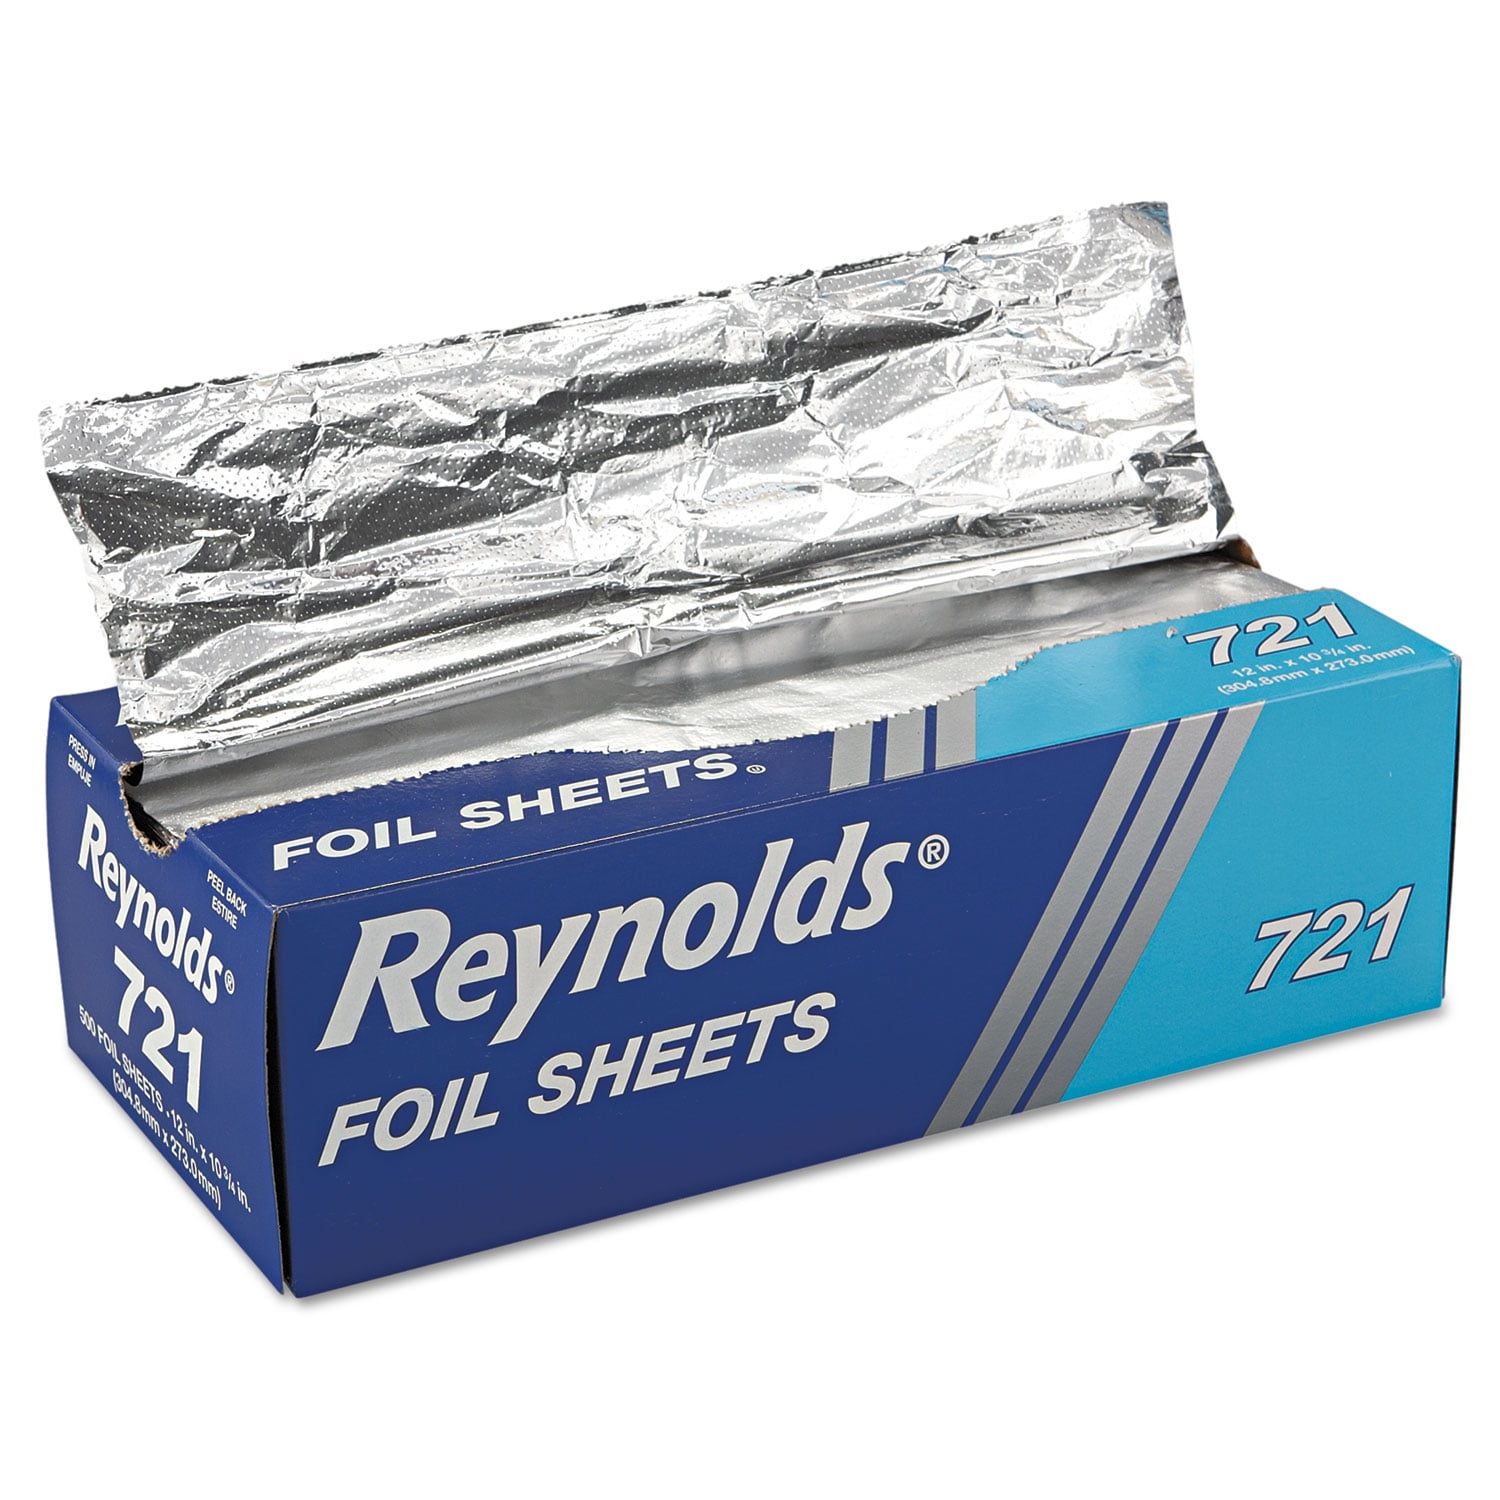 100 Ct Mylar Foil Sheets For Gift Wrapping Gift Basket Filler - 20 x 30 in  by Crown Display - Gold